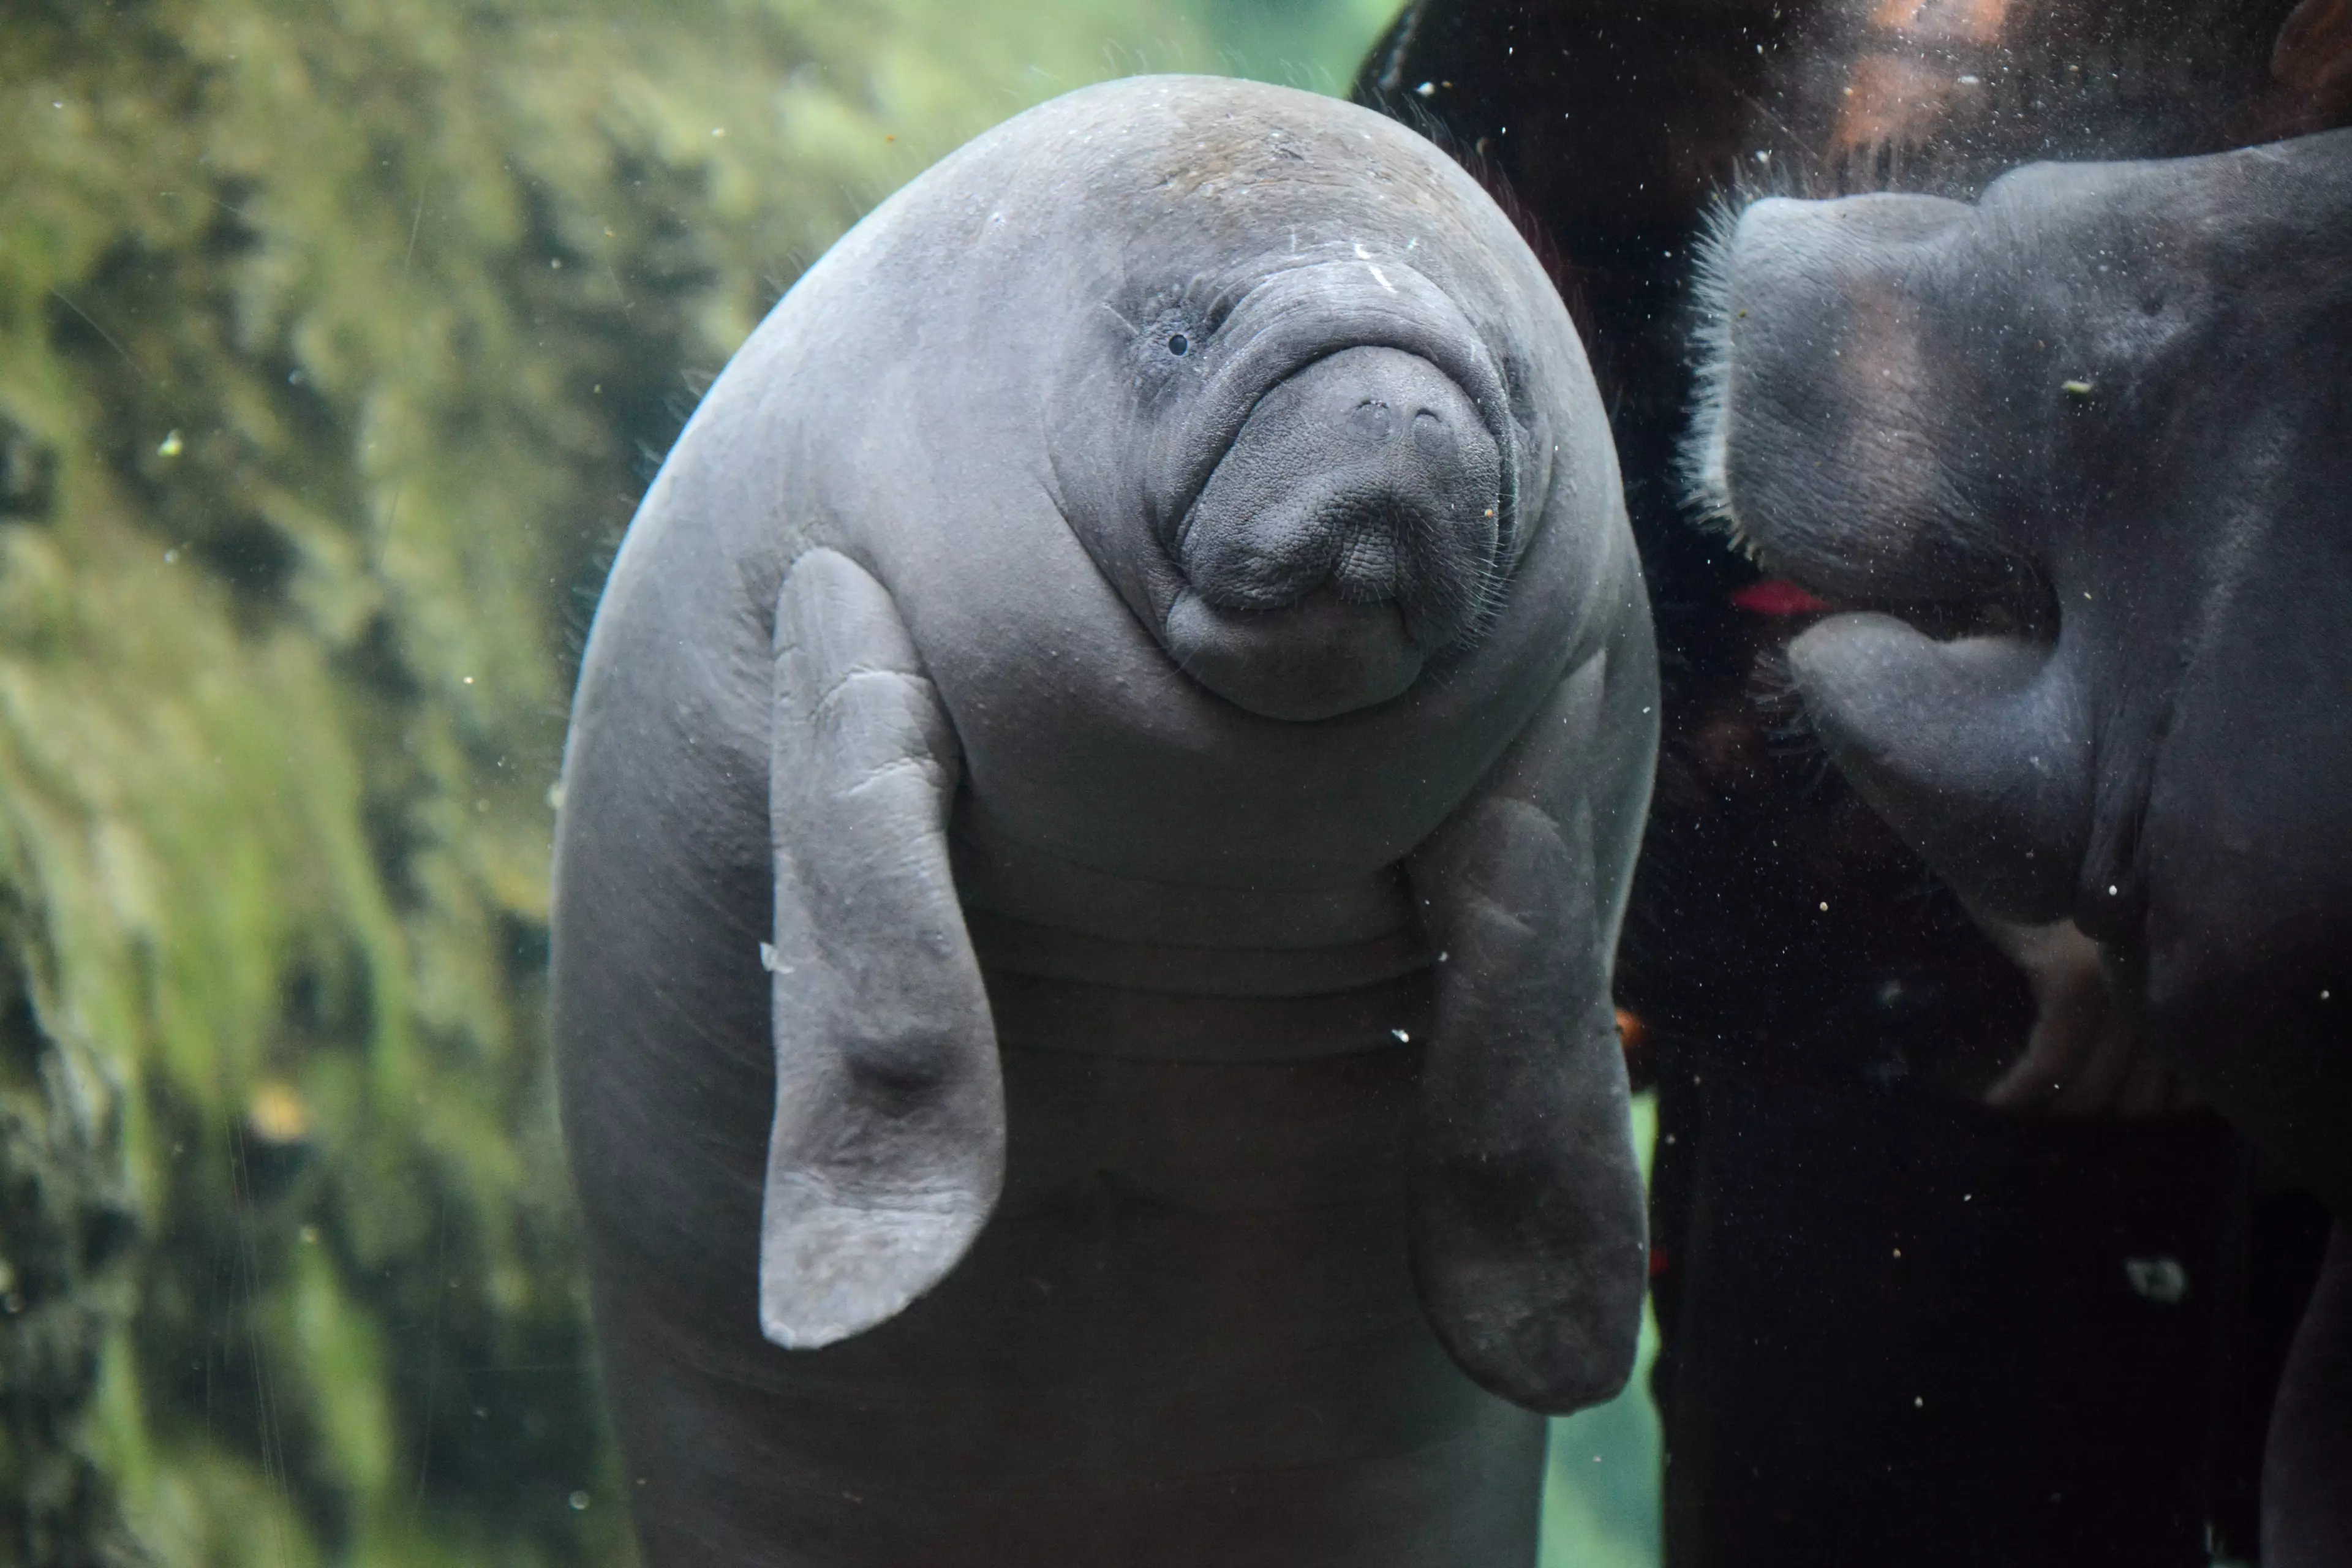 In 2015, it was estimated there are only 10,000 West African manatees living in the wild.